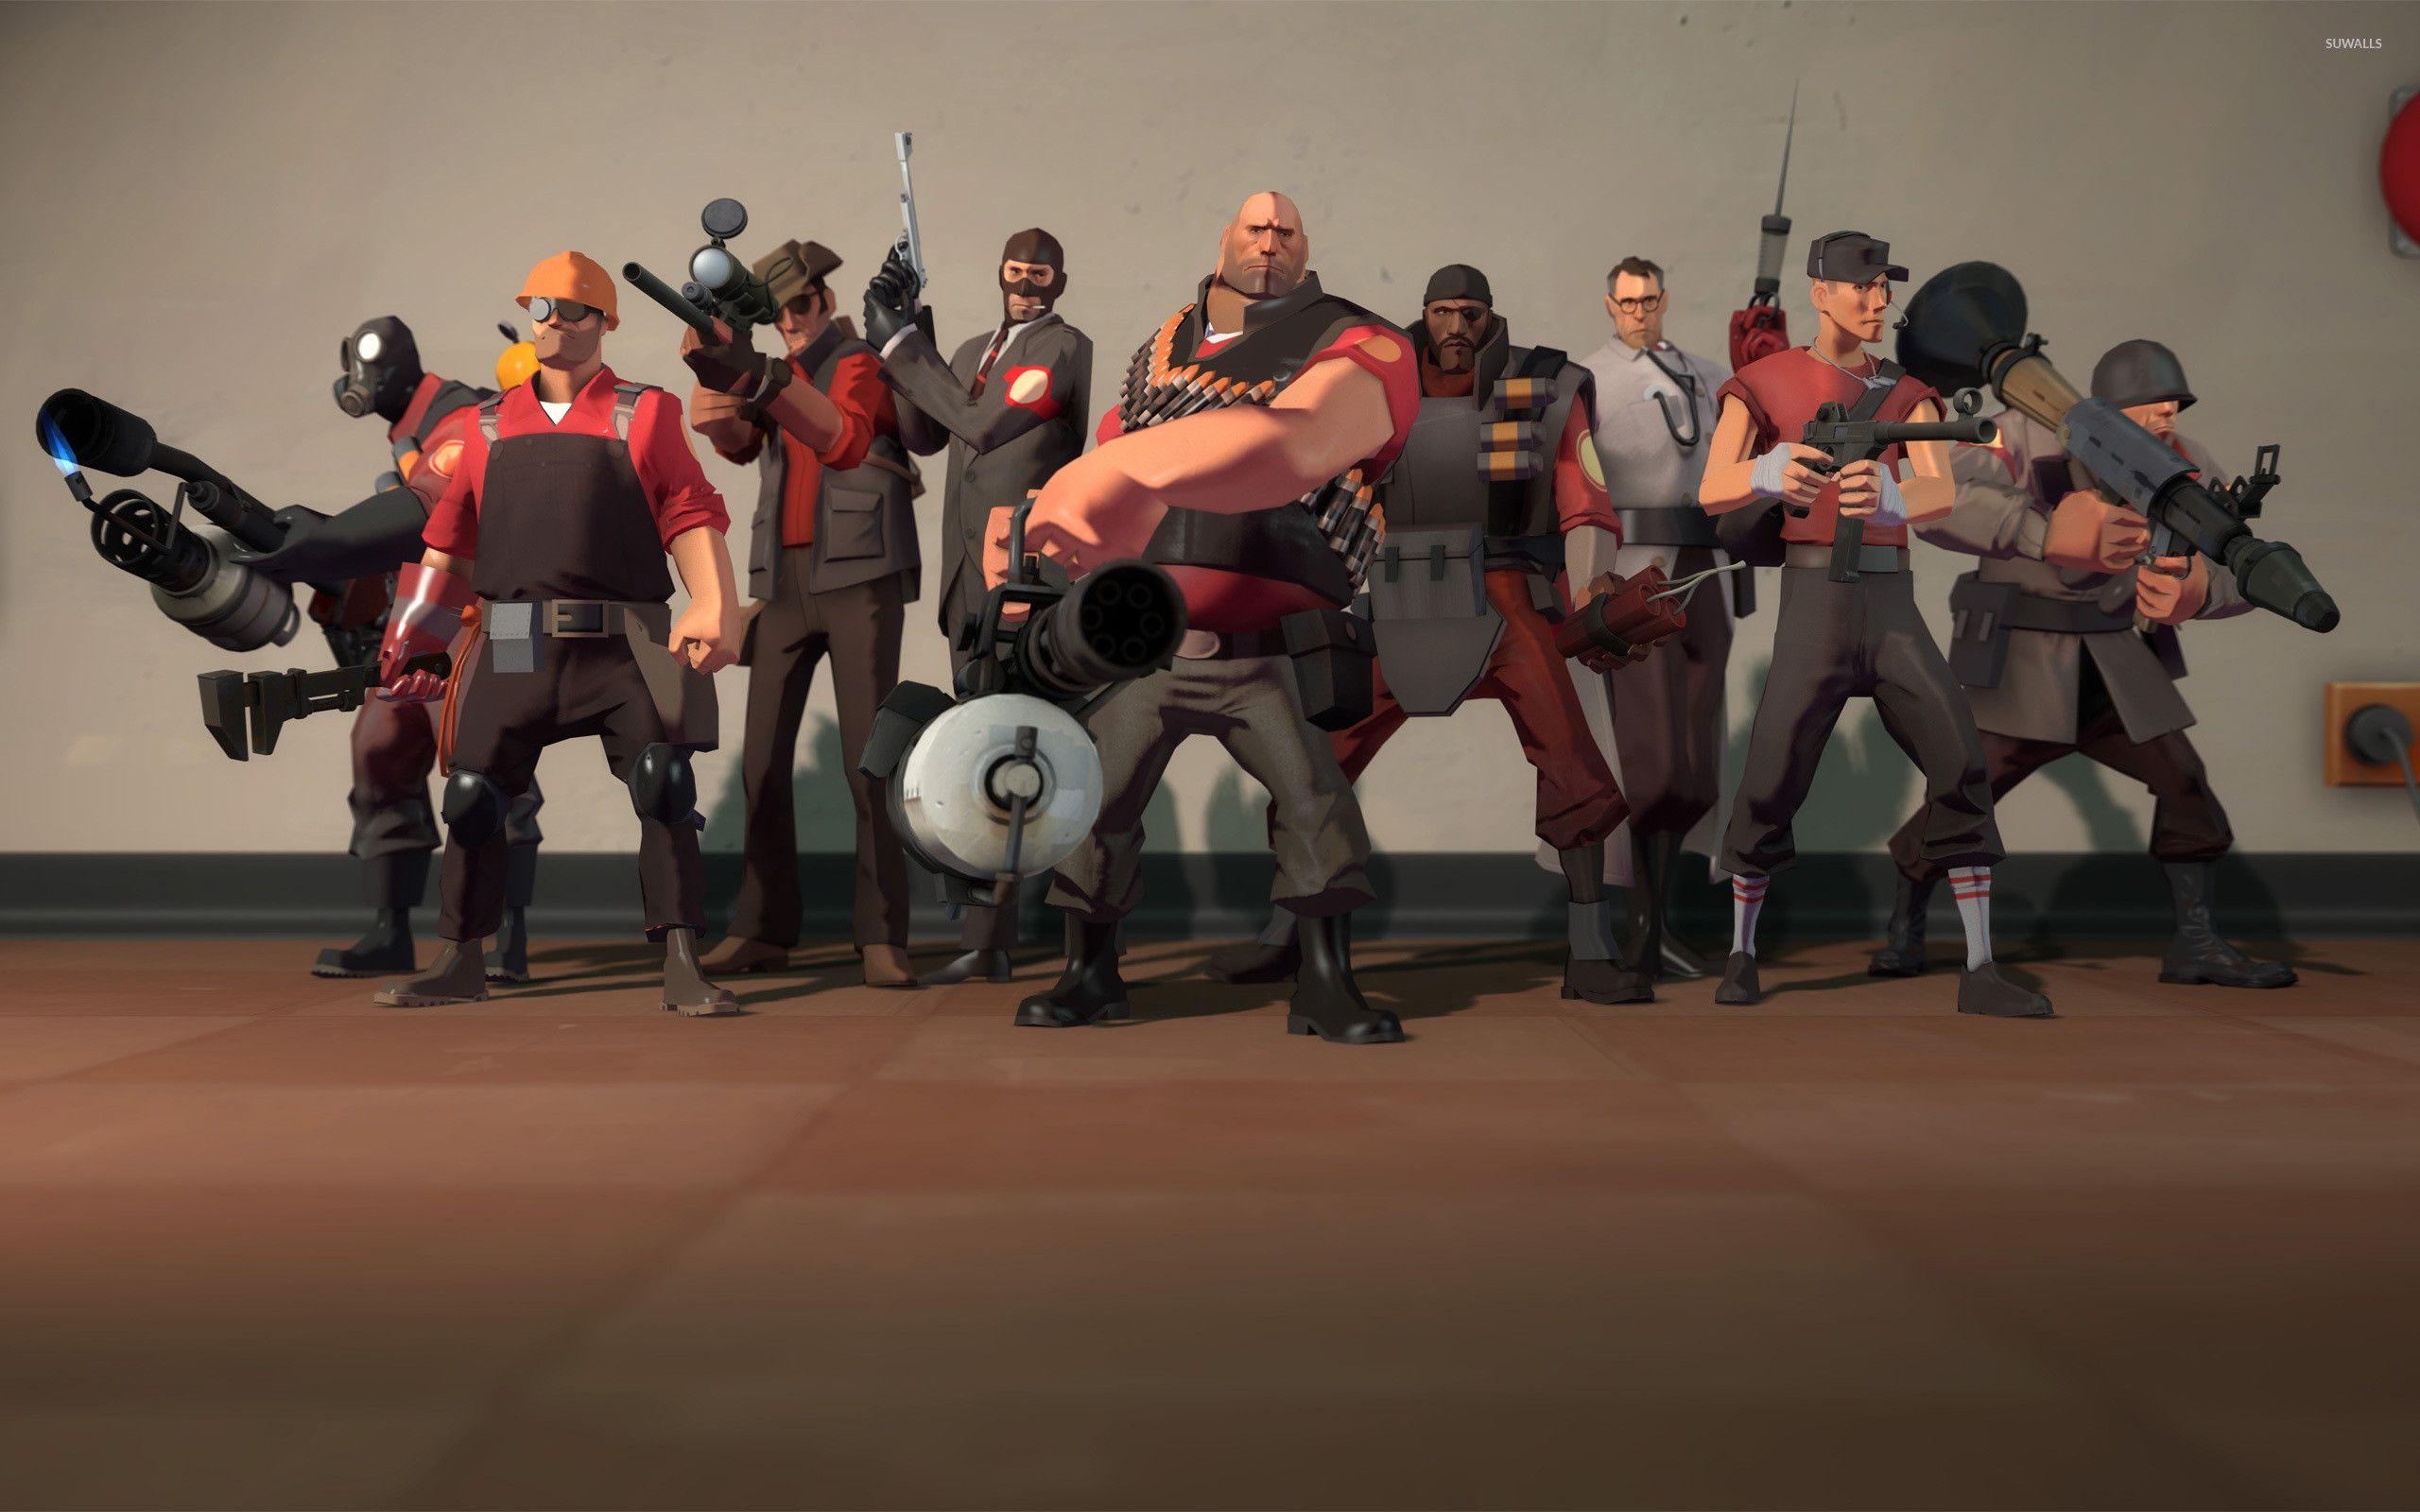 Team Fortress 2 Wallpapers Top Free Team Fortress 2 Backgrounds